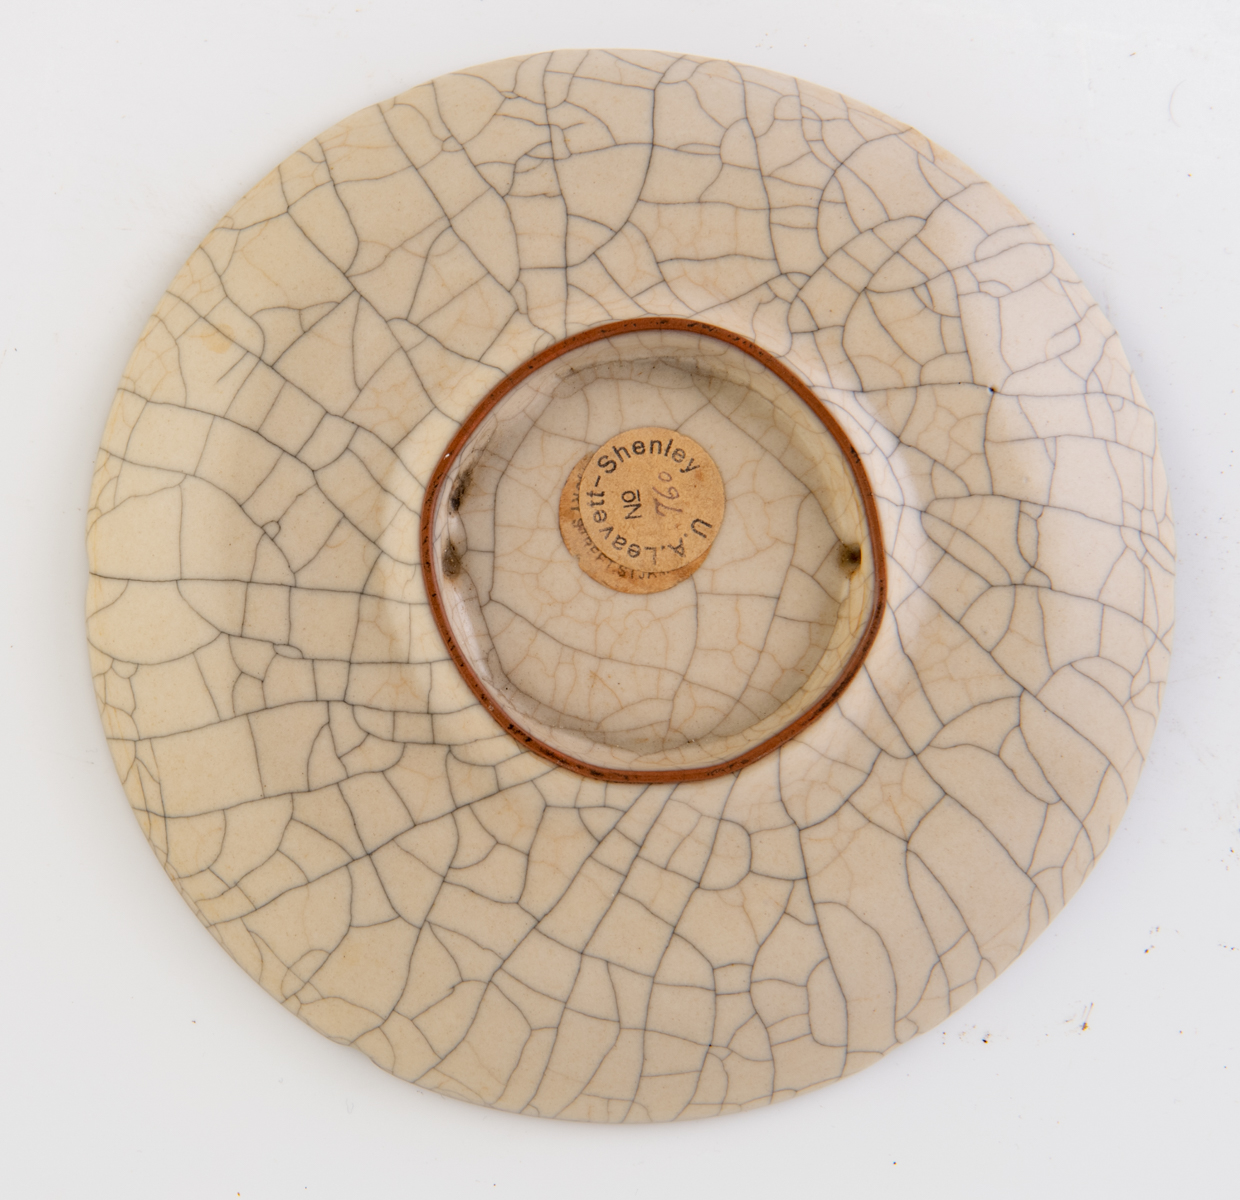 A Chinese Guan type celadon crackleware dish, possibly Song - Yuan period, ø 16 cm - Image 3 of 3